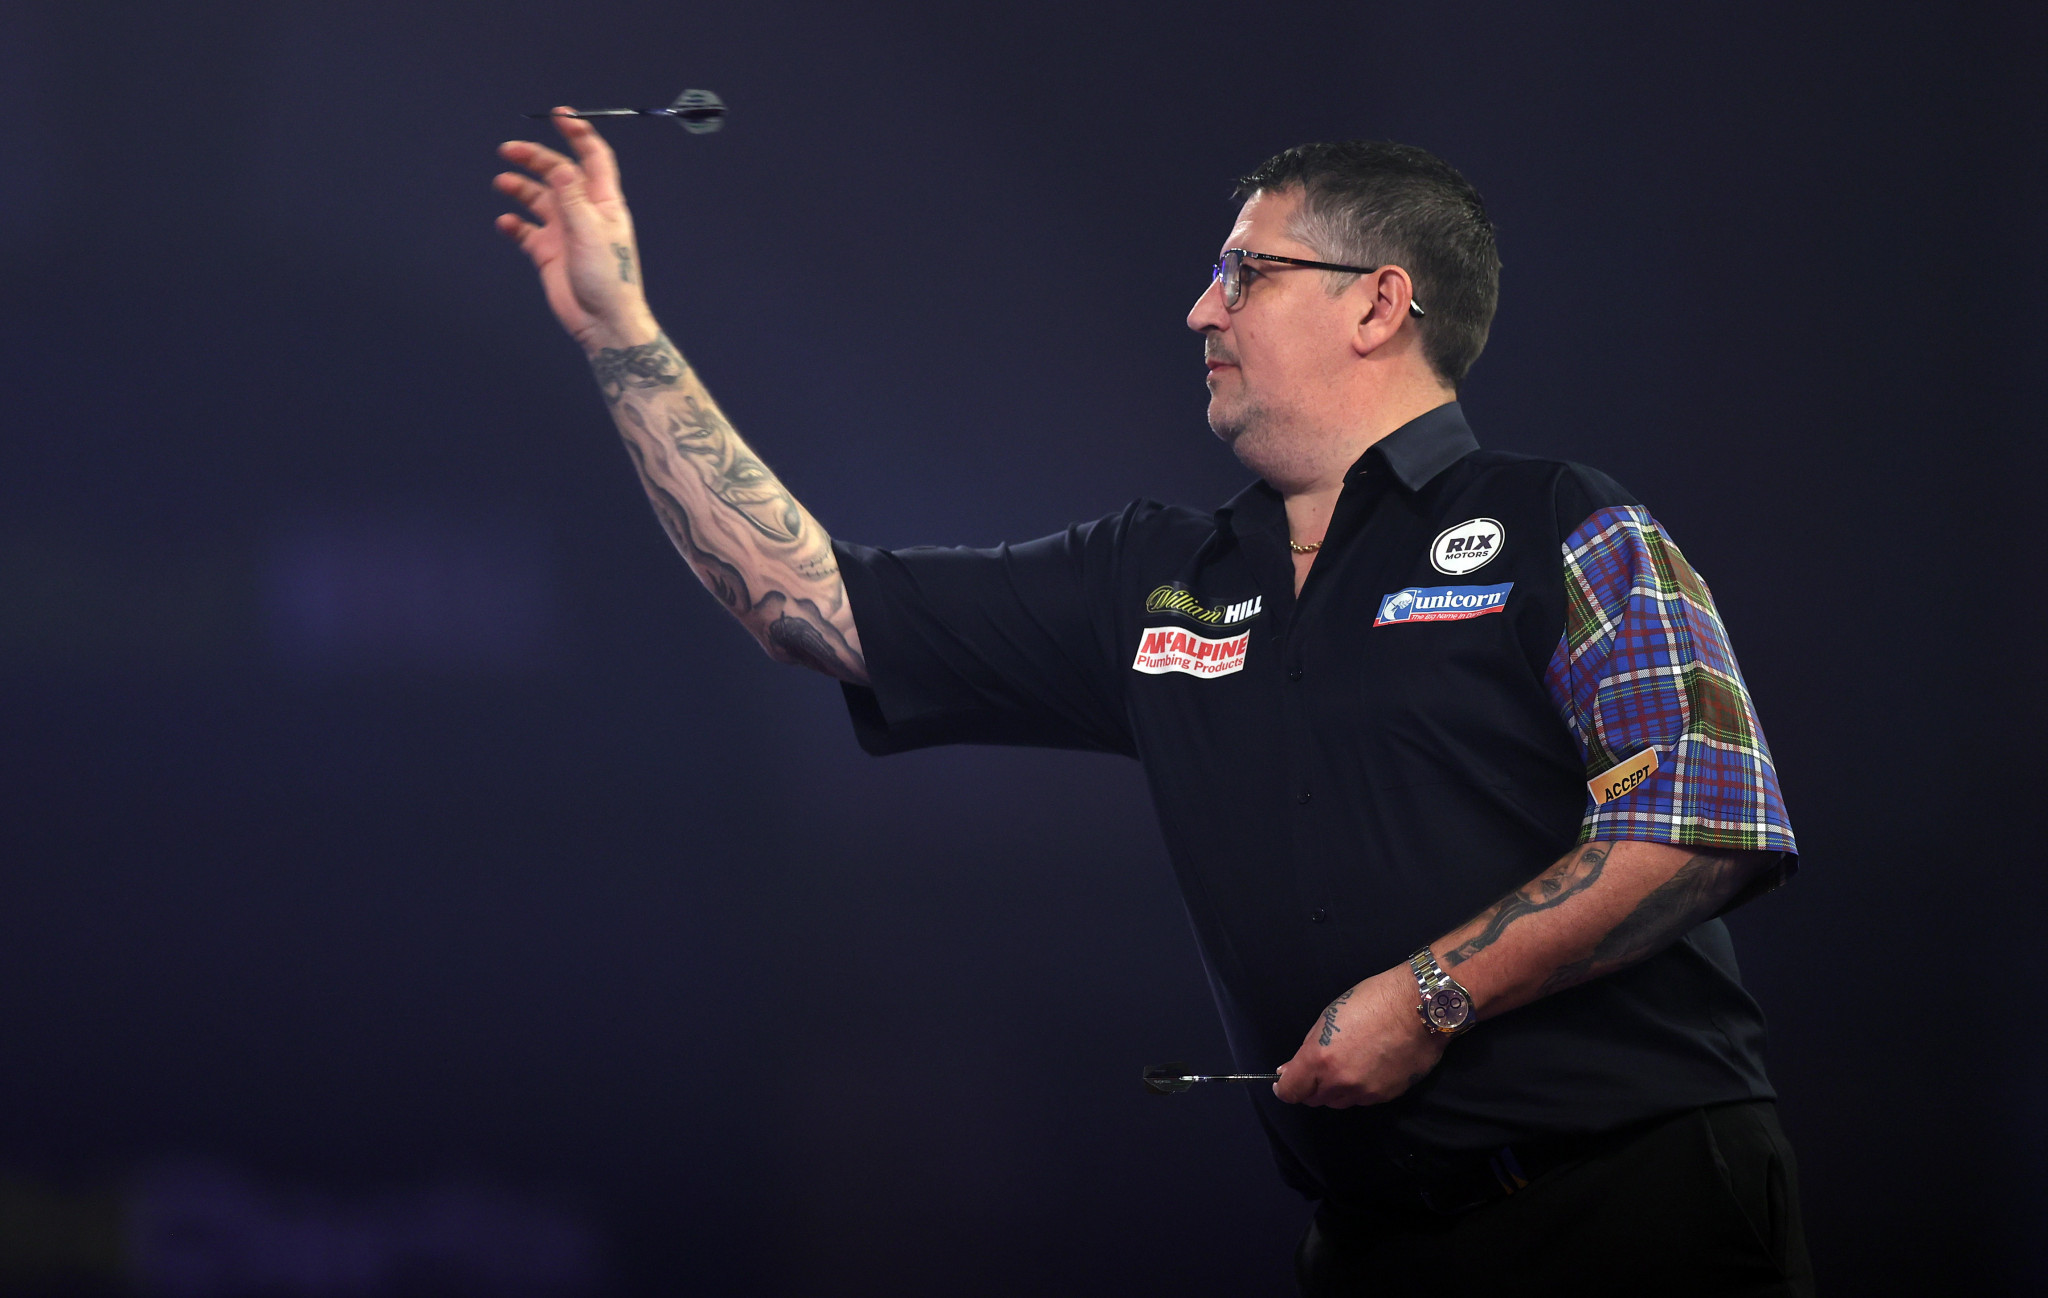 Scotland's Gary Anderson reached his fifth PDC World Darts Championship final after a 6-3 win over Dave Chisnall ©Getty Images